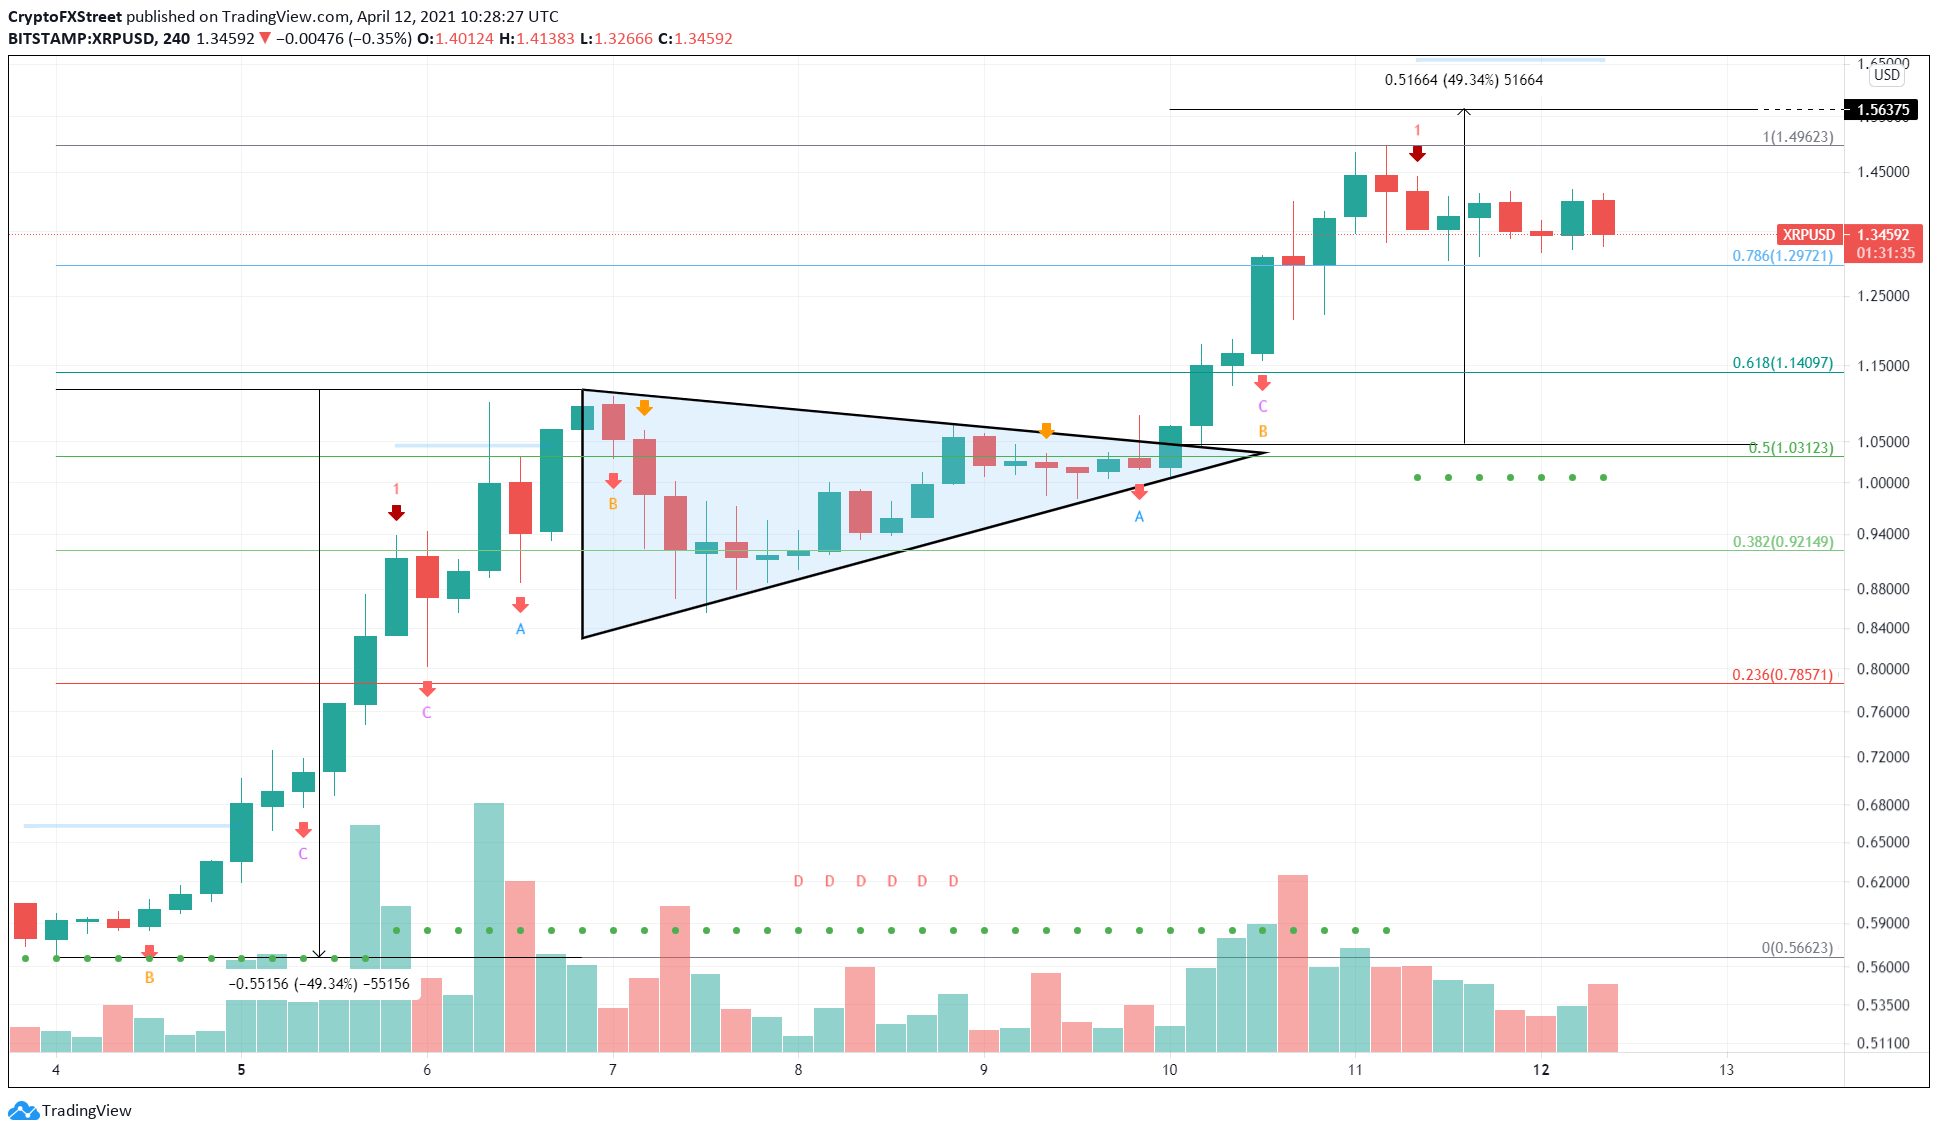 XRP/USD 4-hour chart